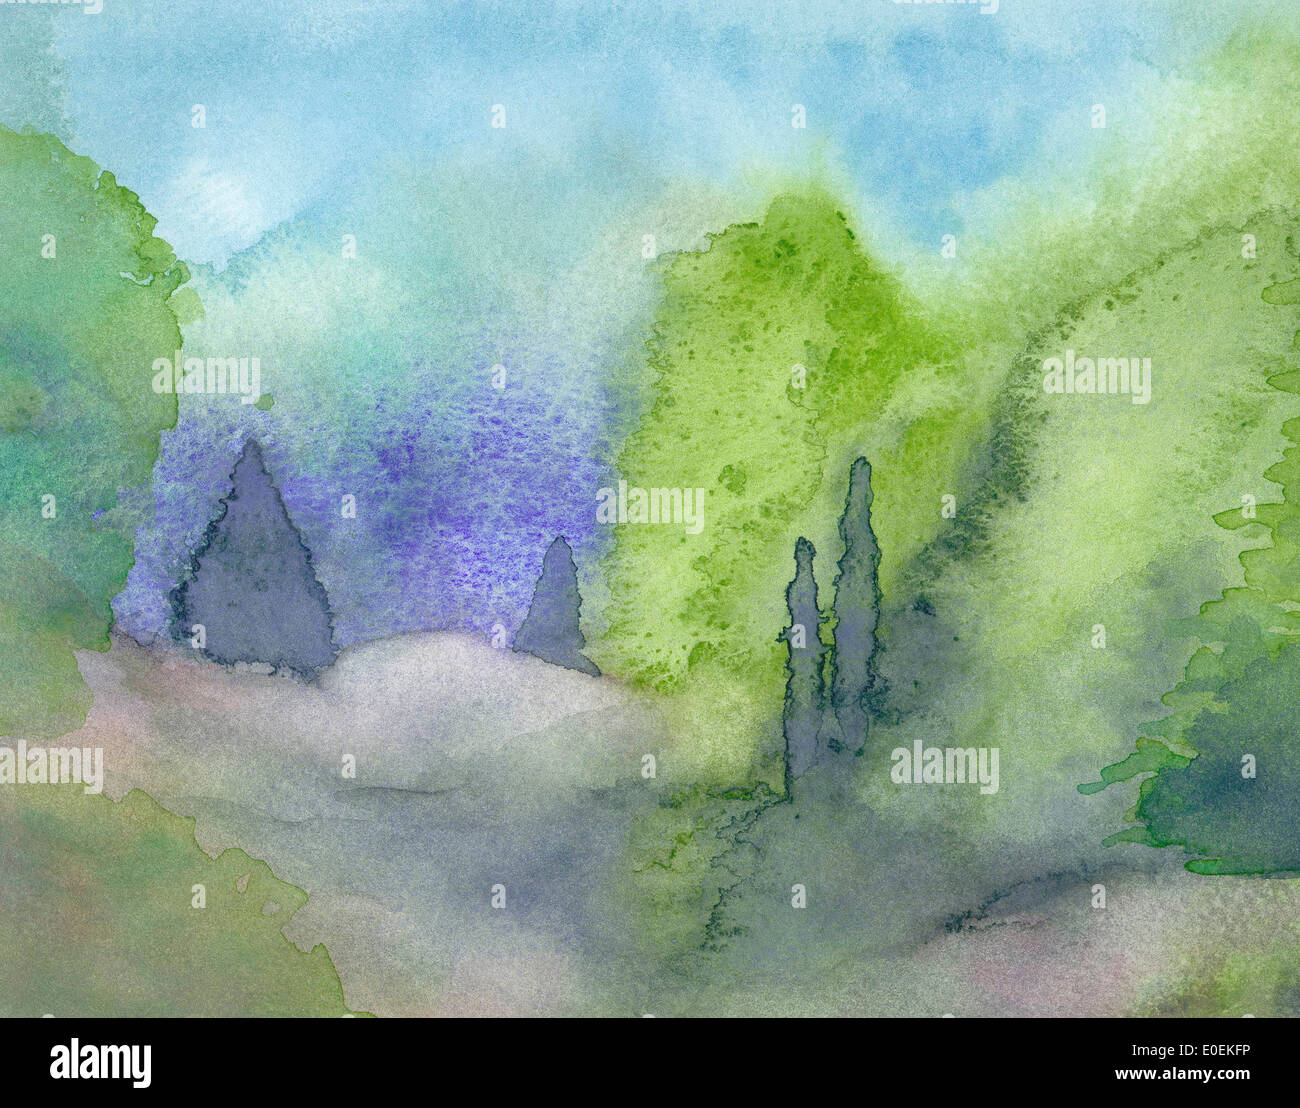 Hazy and atmospheric summer scenery with junipers. Watercolor painting landscape with junipers. Stock Photo